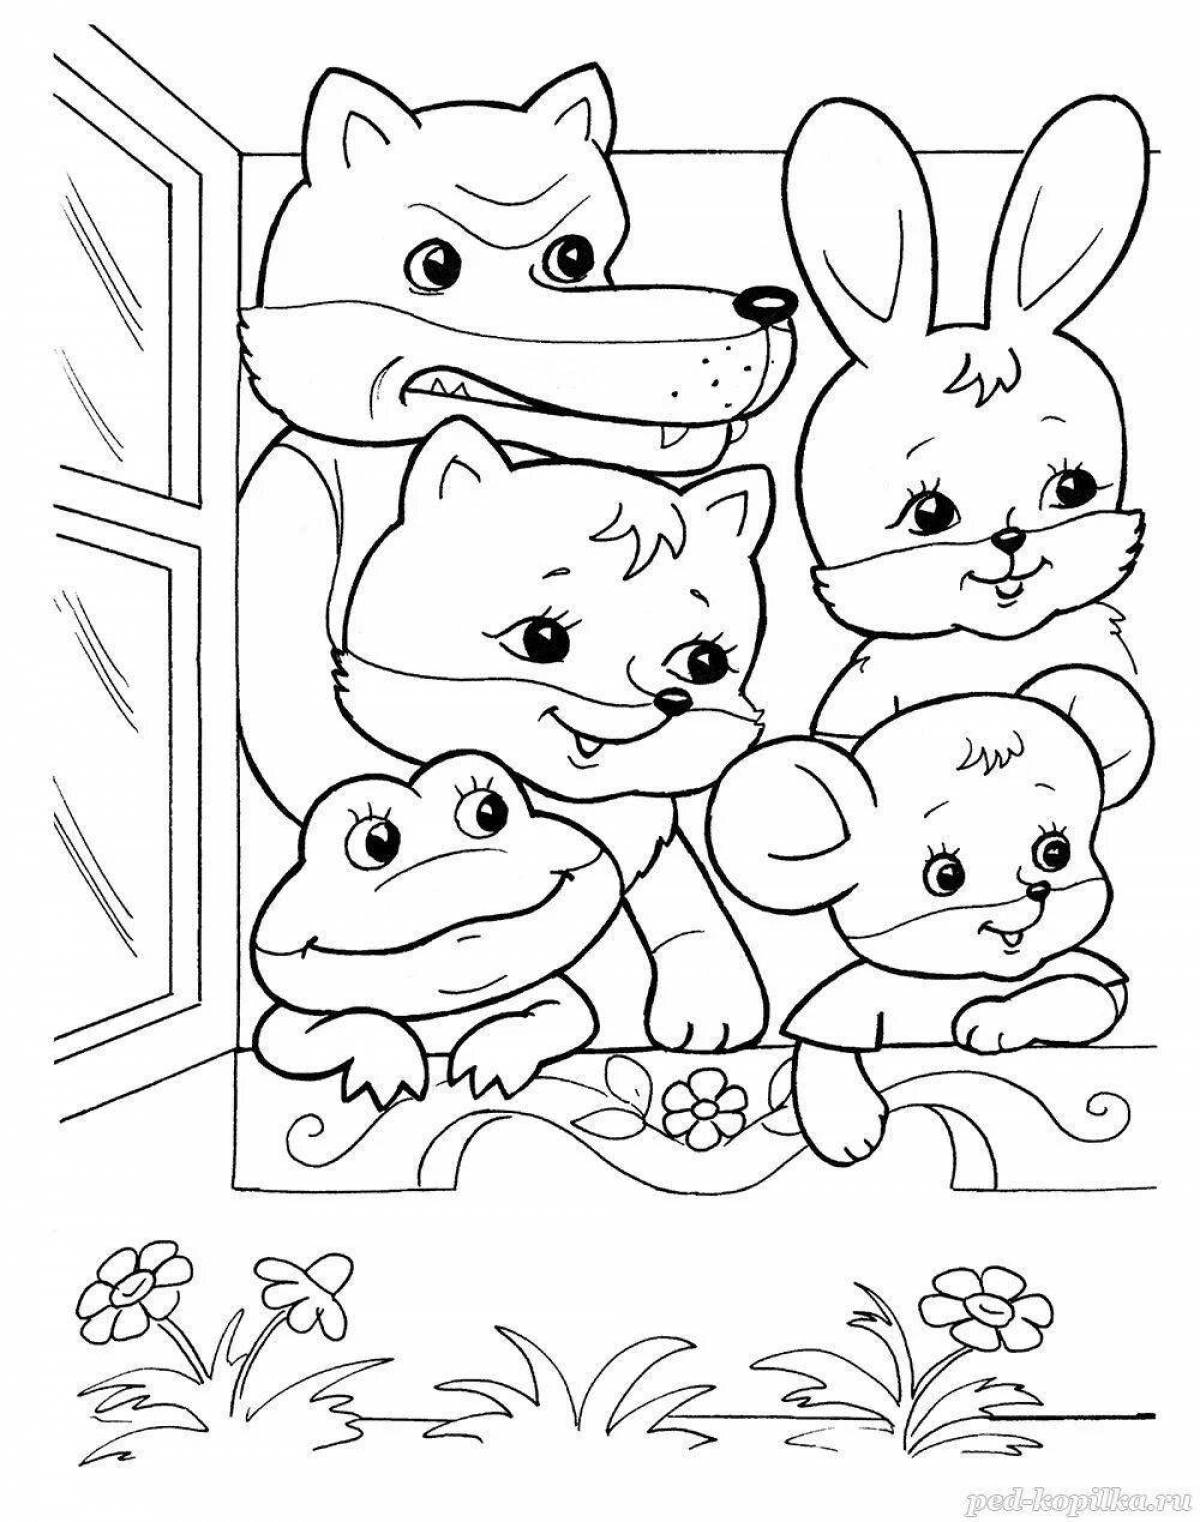 Fun coloring mittens fairy tale for children